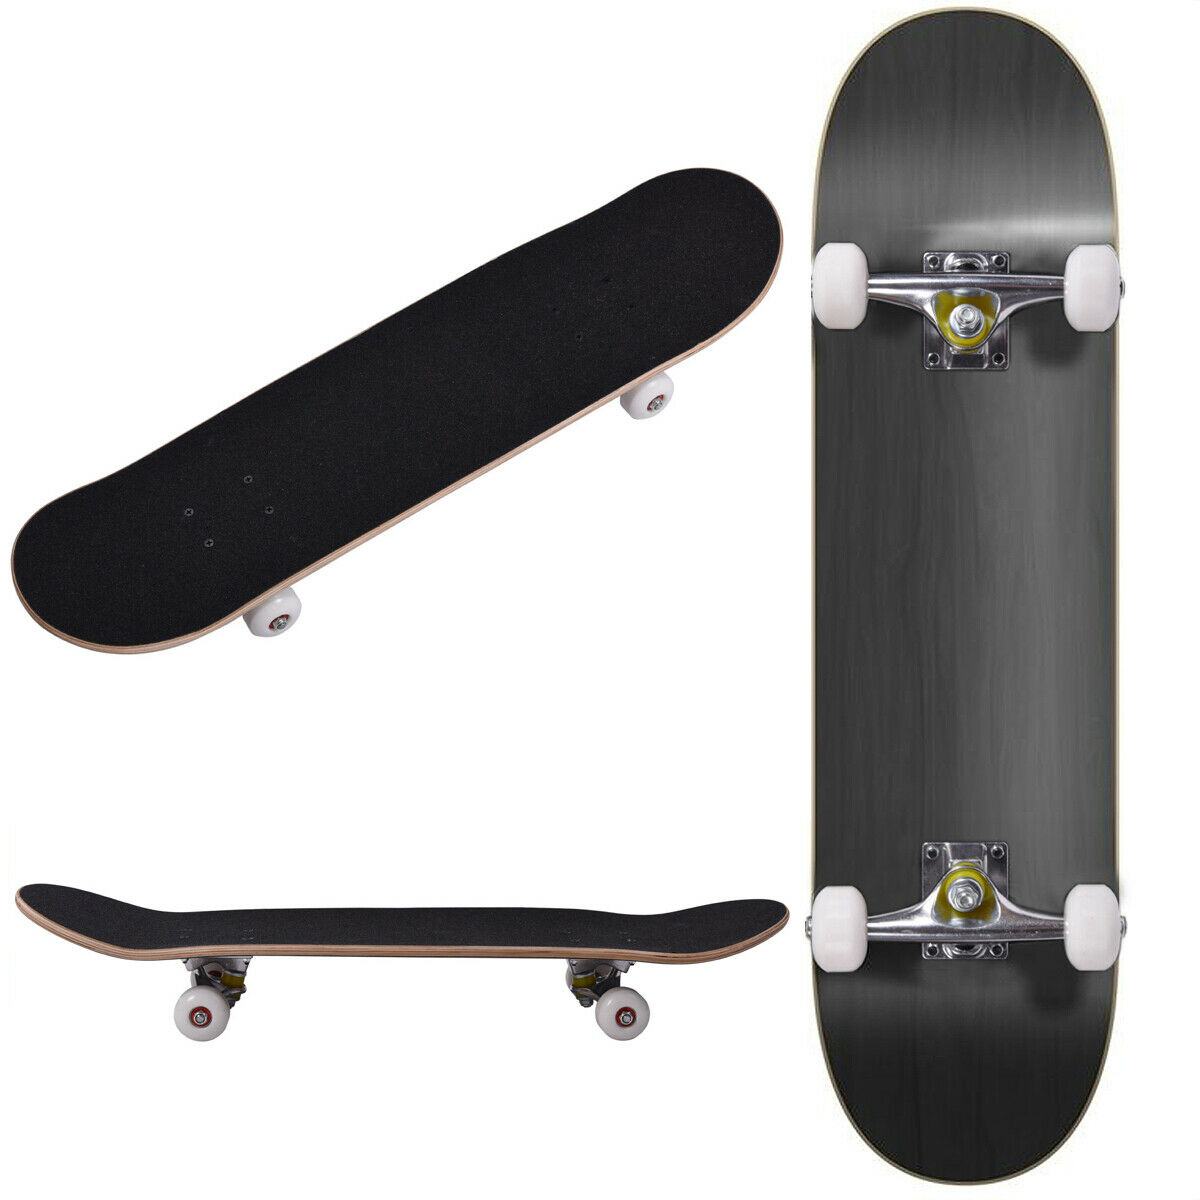 Robbi Blank Complete Skateboard Stained Black 7.75" Skateboards, Ready To Ride